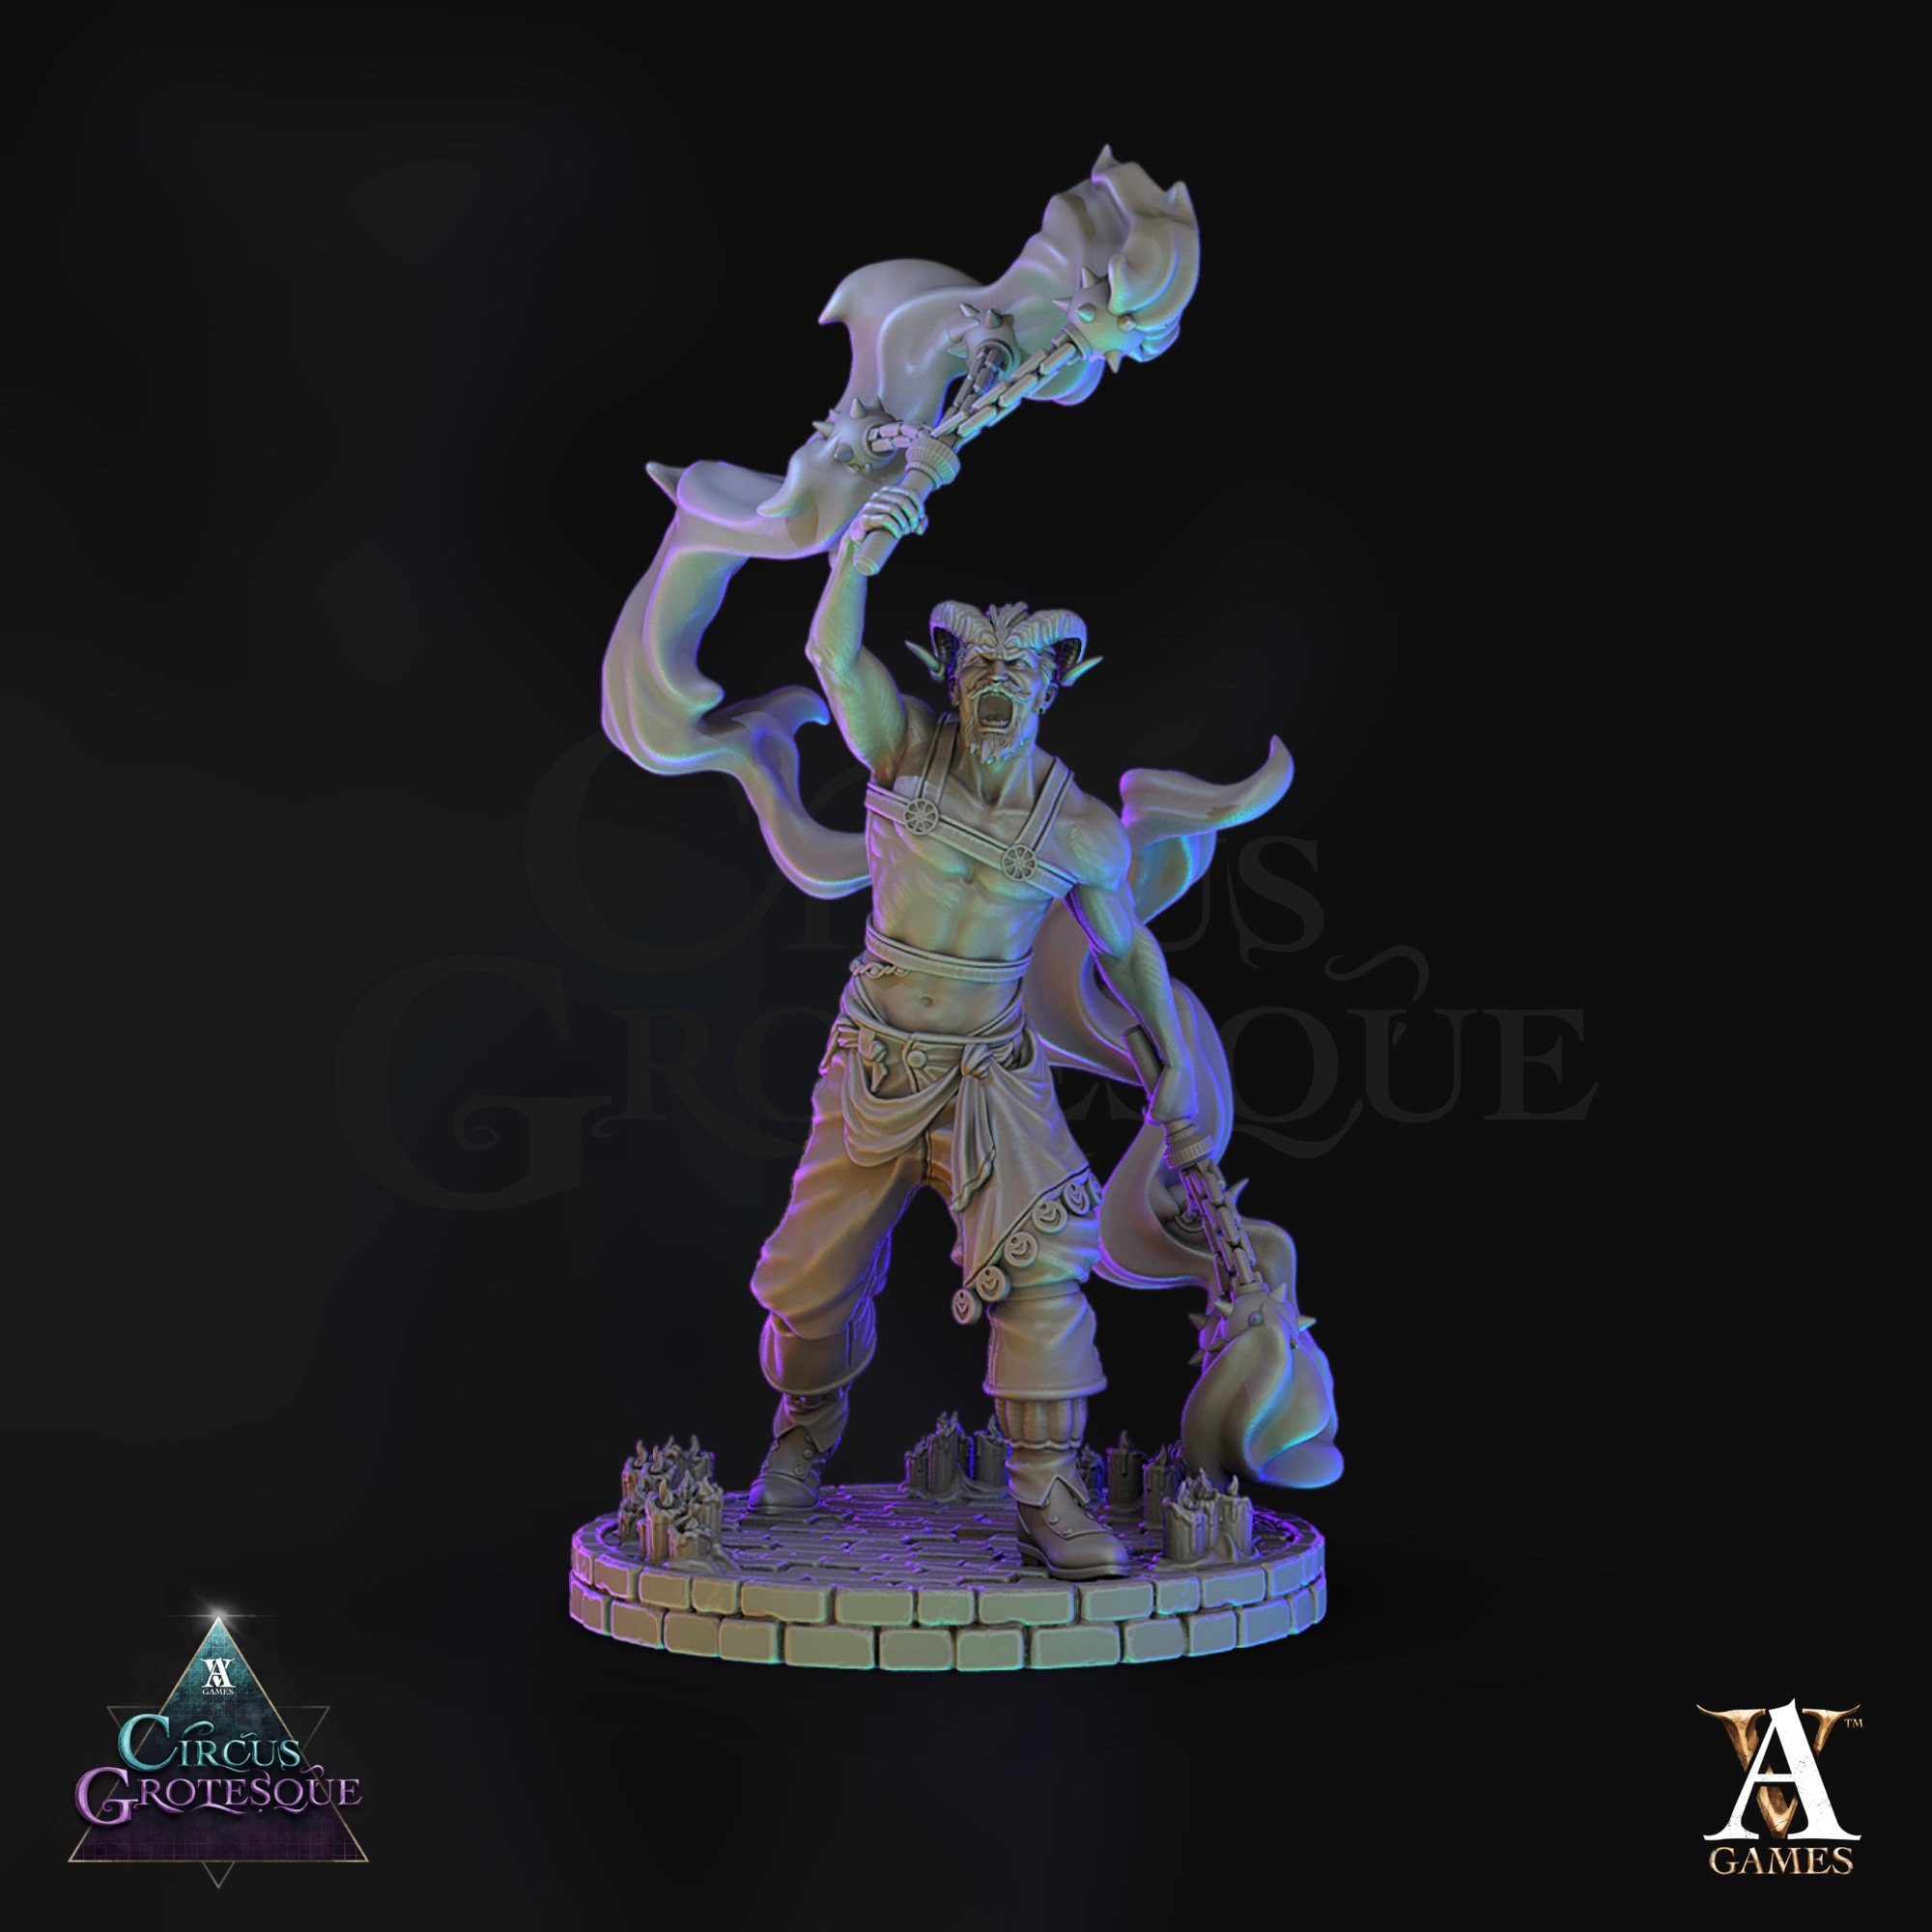 The Circus Grotesque Archvillain Games Details about   Cheval Tieflings 